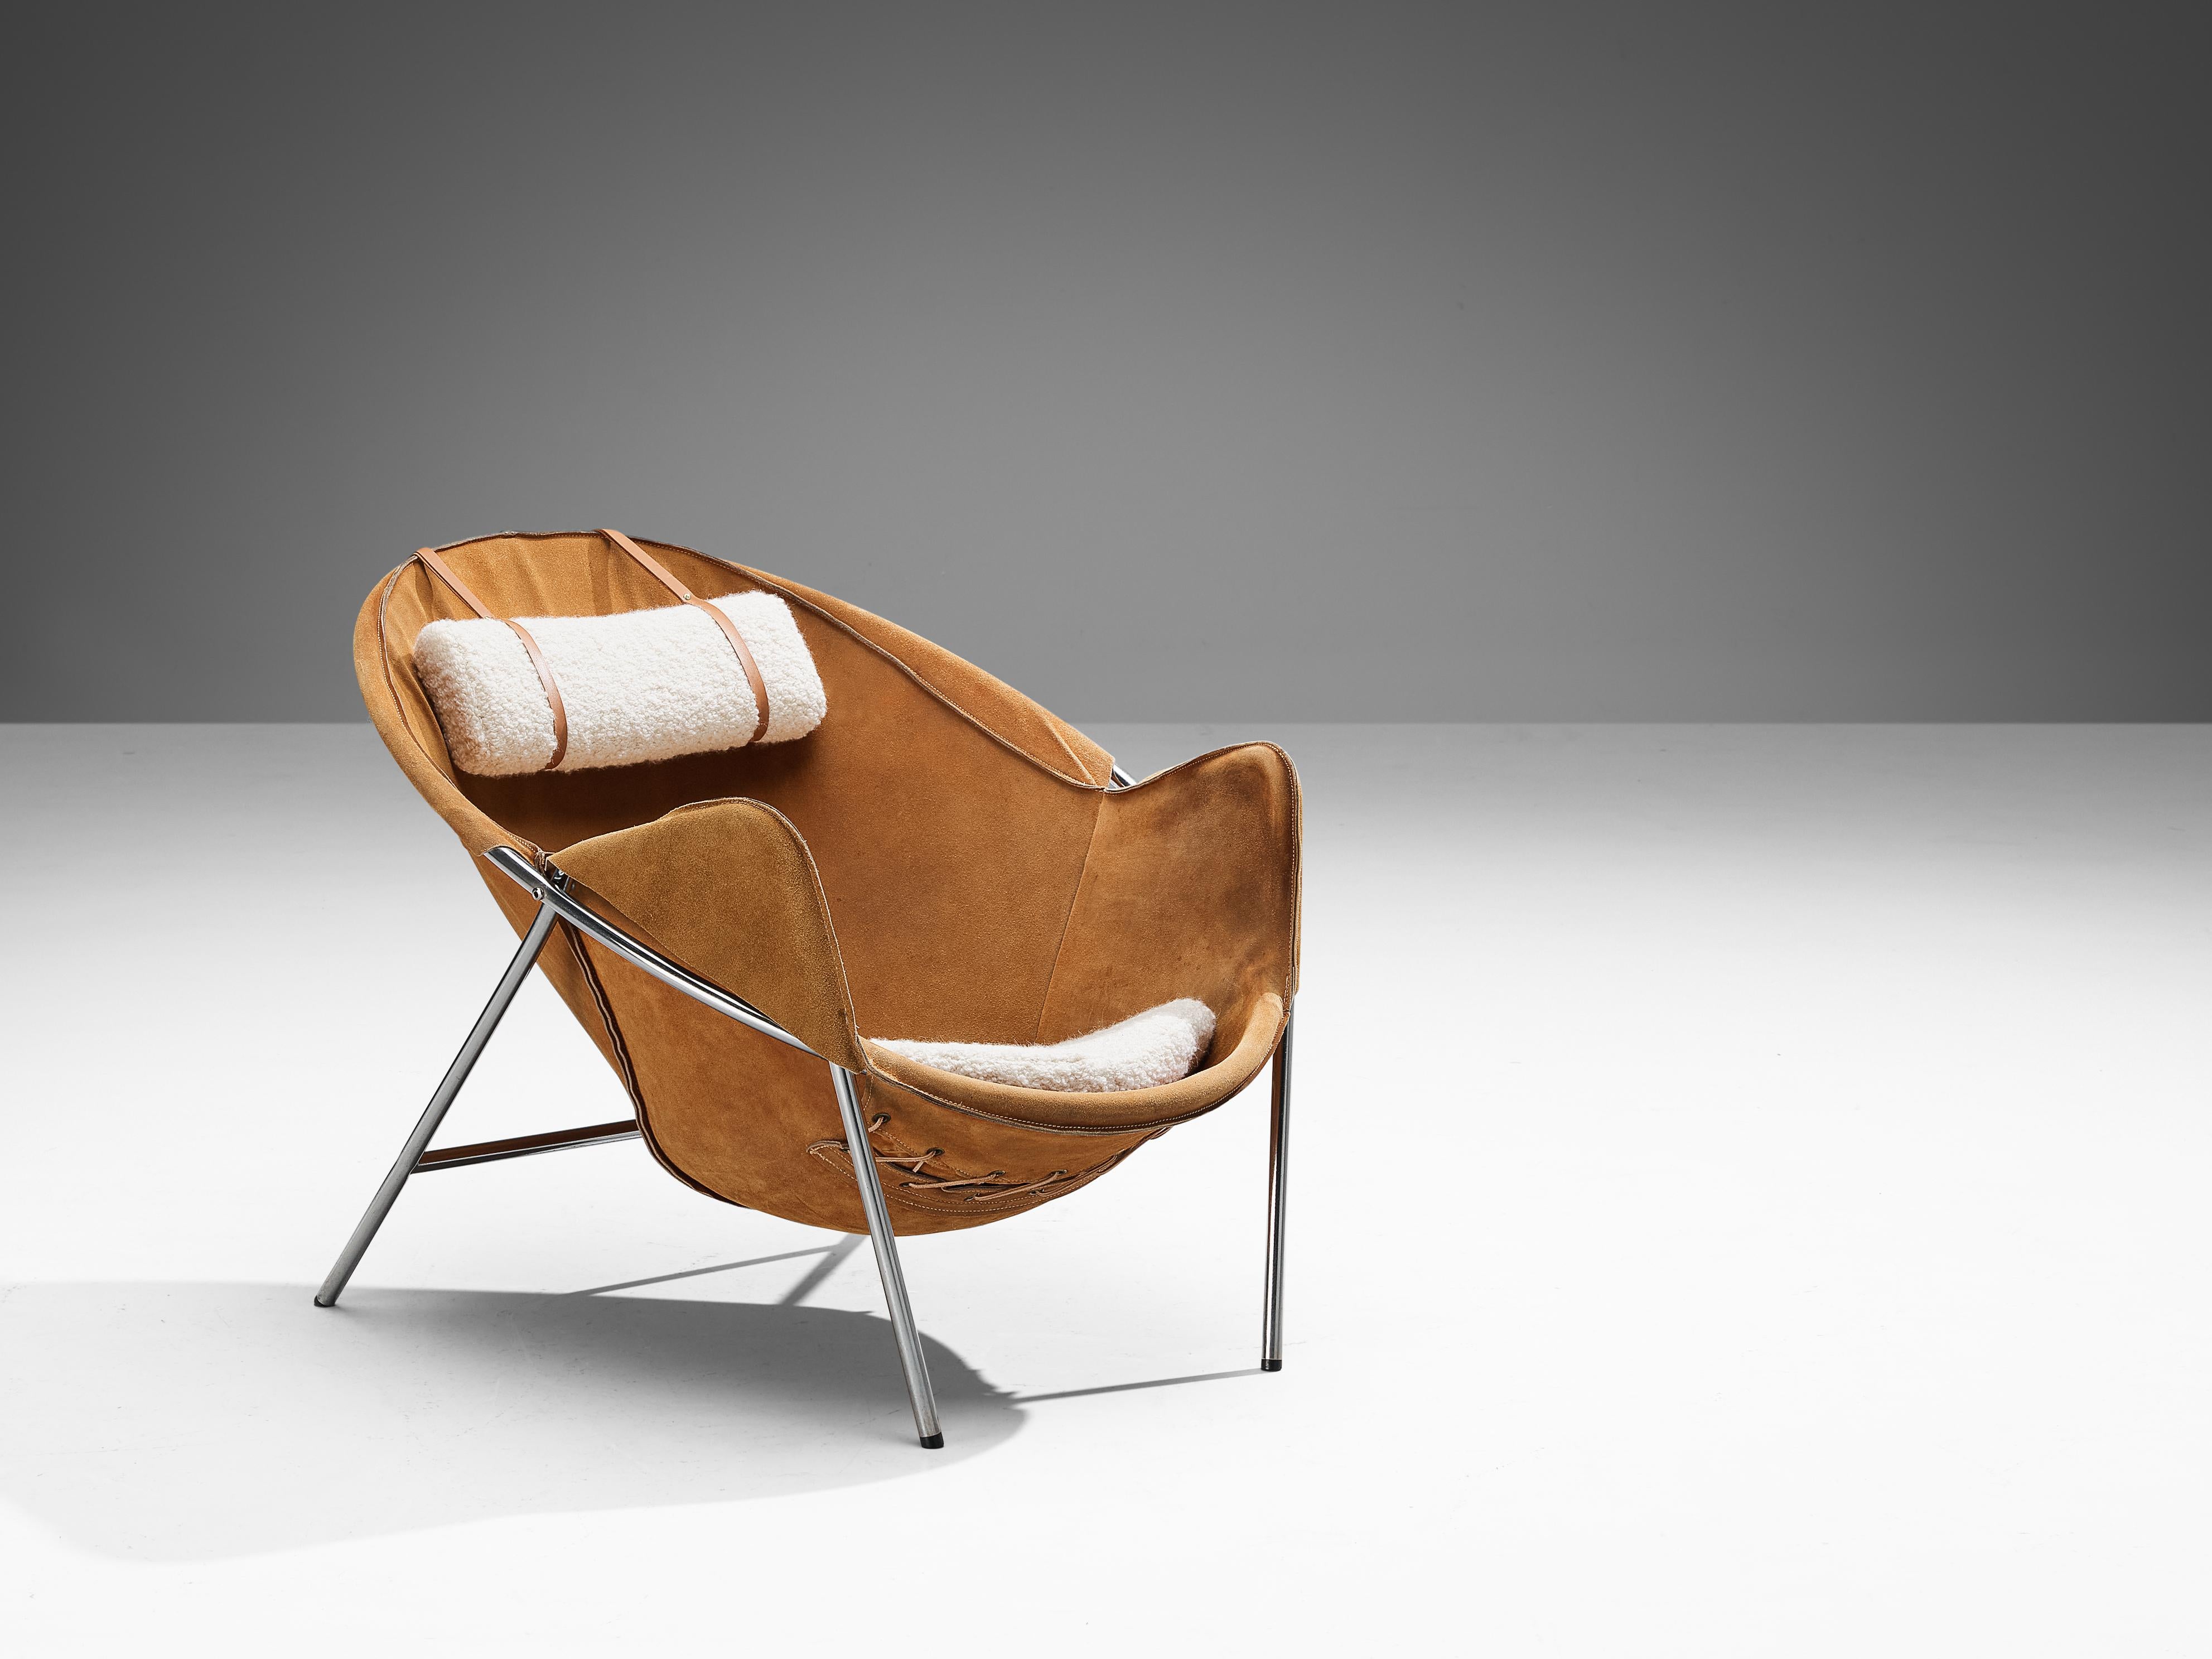 Erik Jørgensen for Bovirke, lounge chair, model BO361, chrome-plated steel, suede, wool, brass, leather, Denmark, design 1953

This design by Erik Jørgensen epitomizes a splendid construction featuring a ball-shaped seating that is attached to a